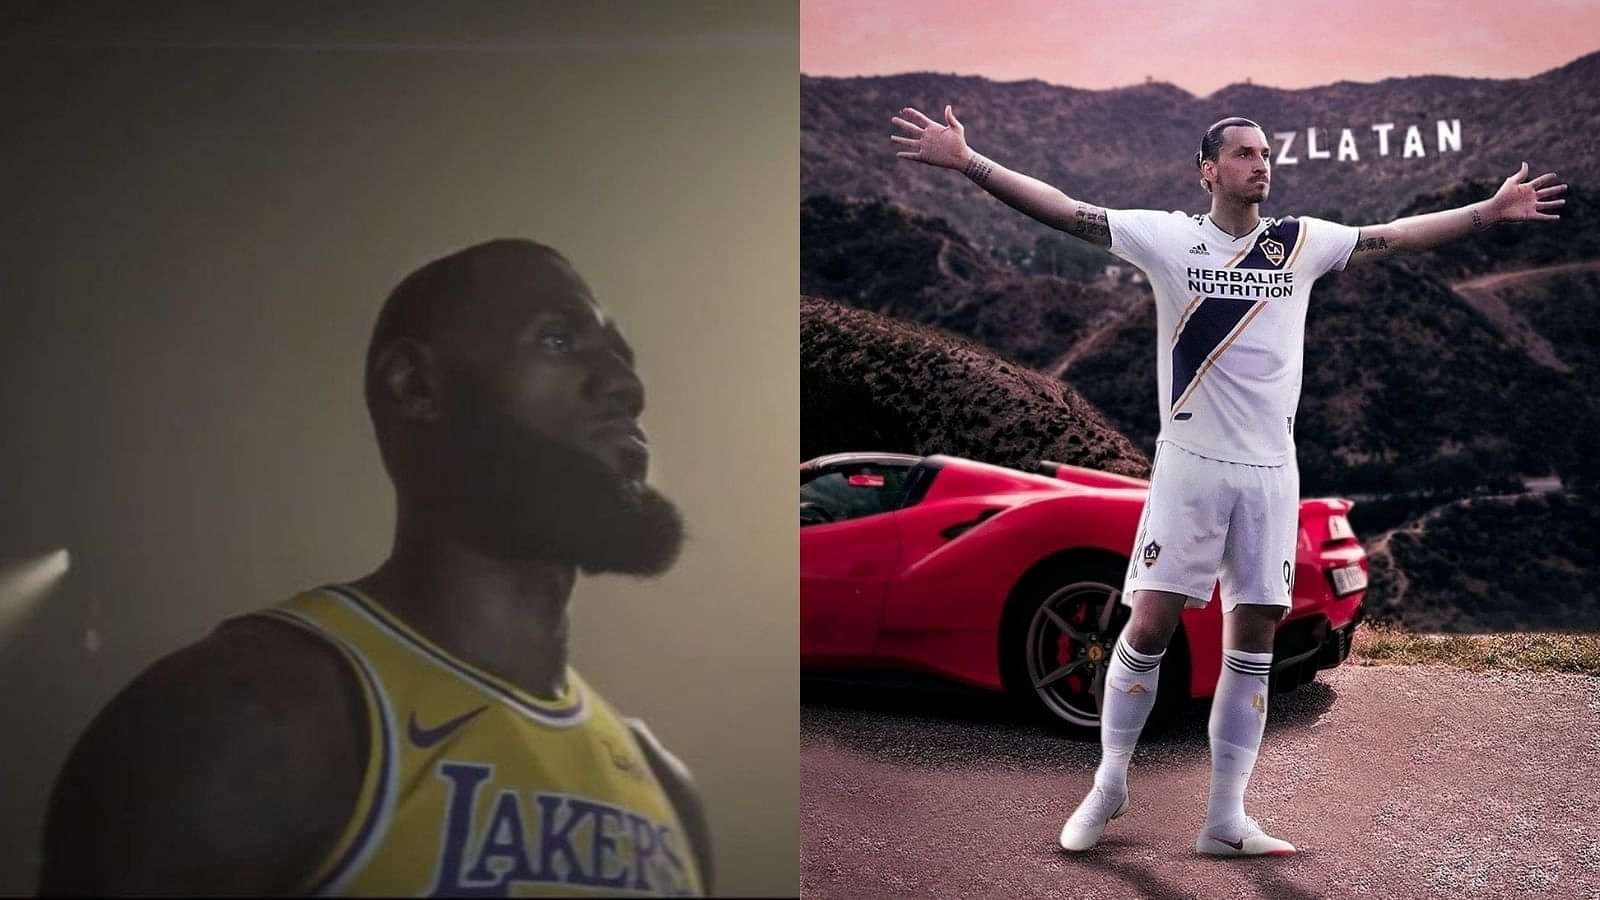 TIL that when Zlatan Ibrahimovic signed for MLS club LA Galaxy, LeBron James  sent him one of his Lakers jerseys as a welcome to LA gift. Zlatan's  response was to sign it